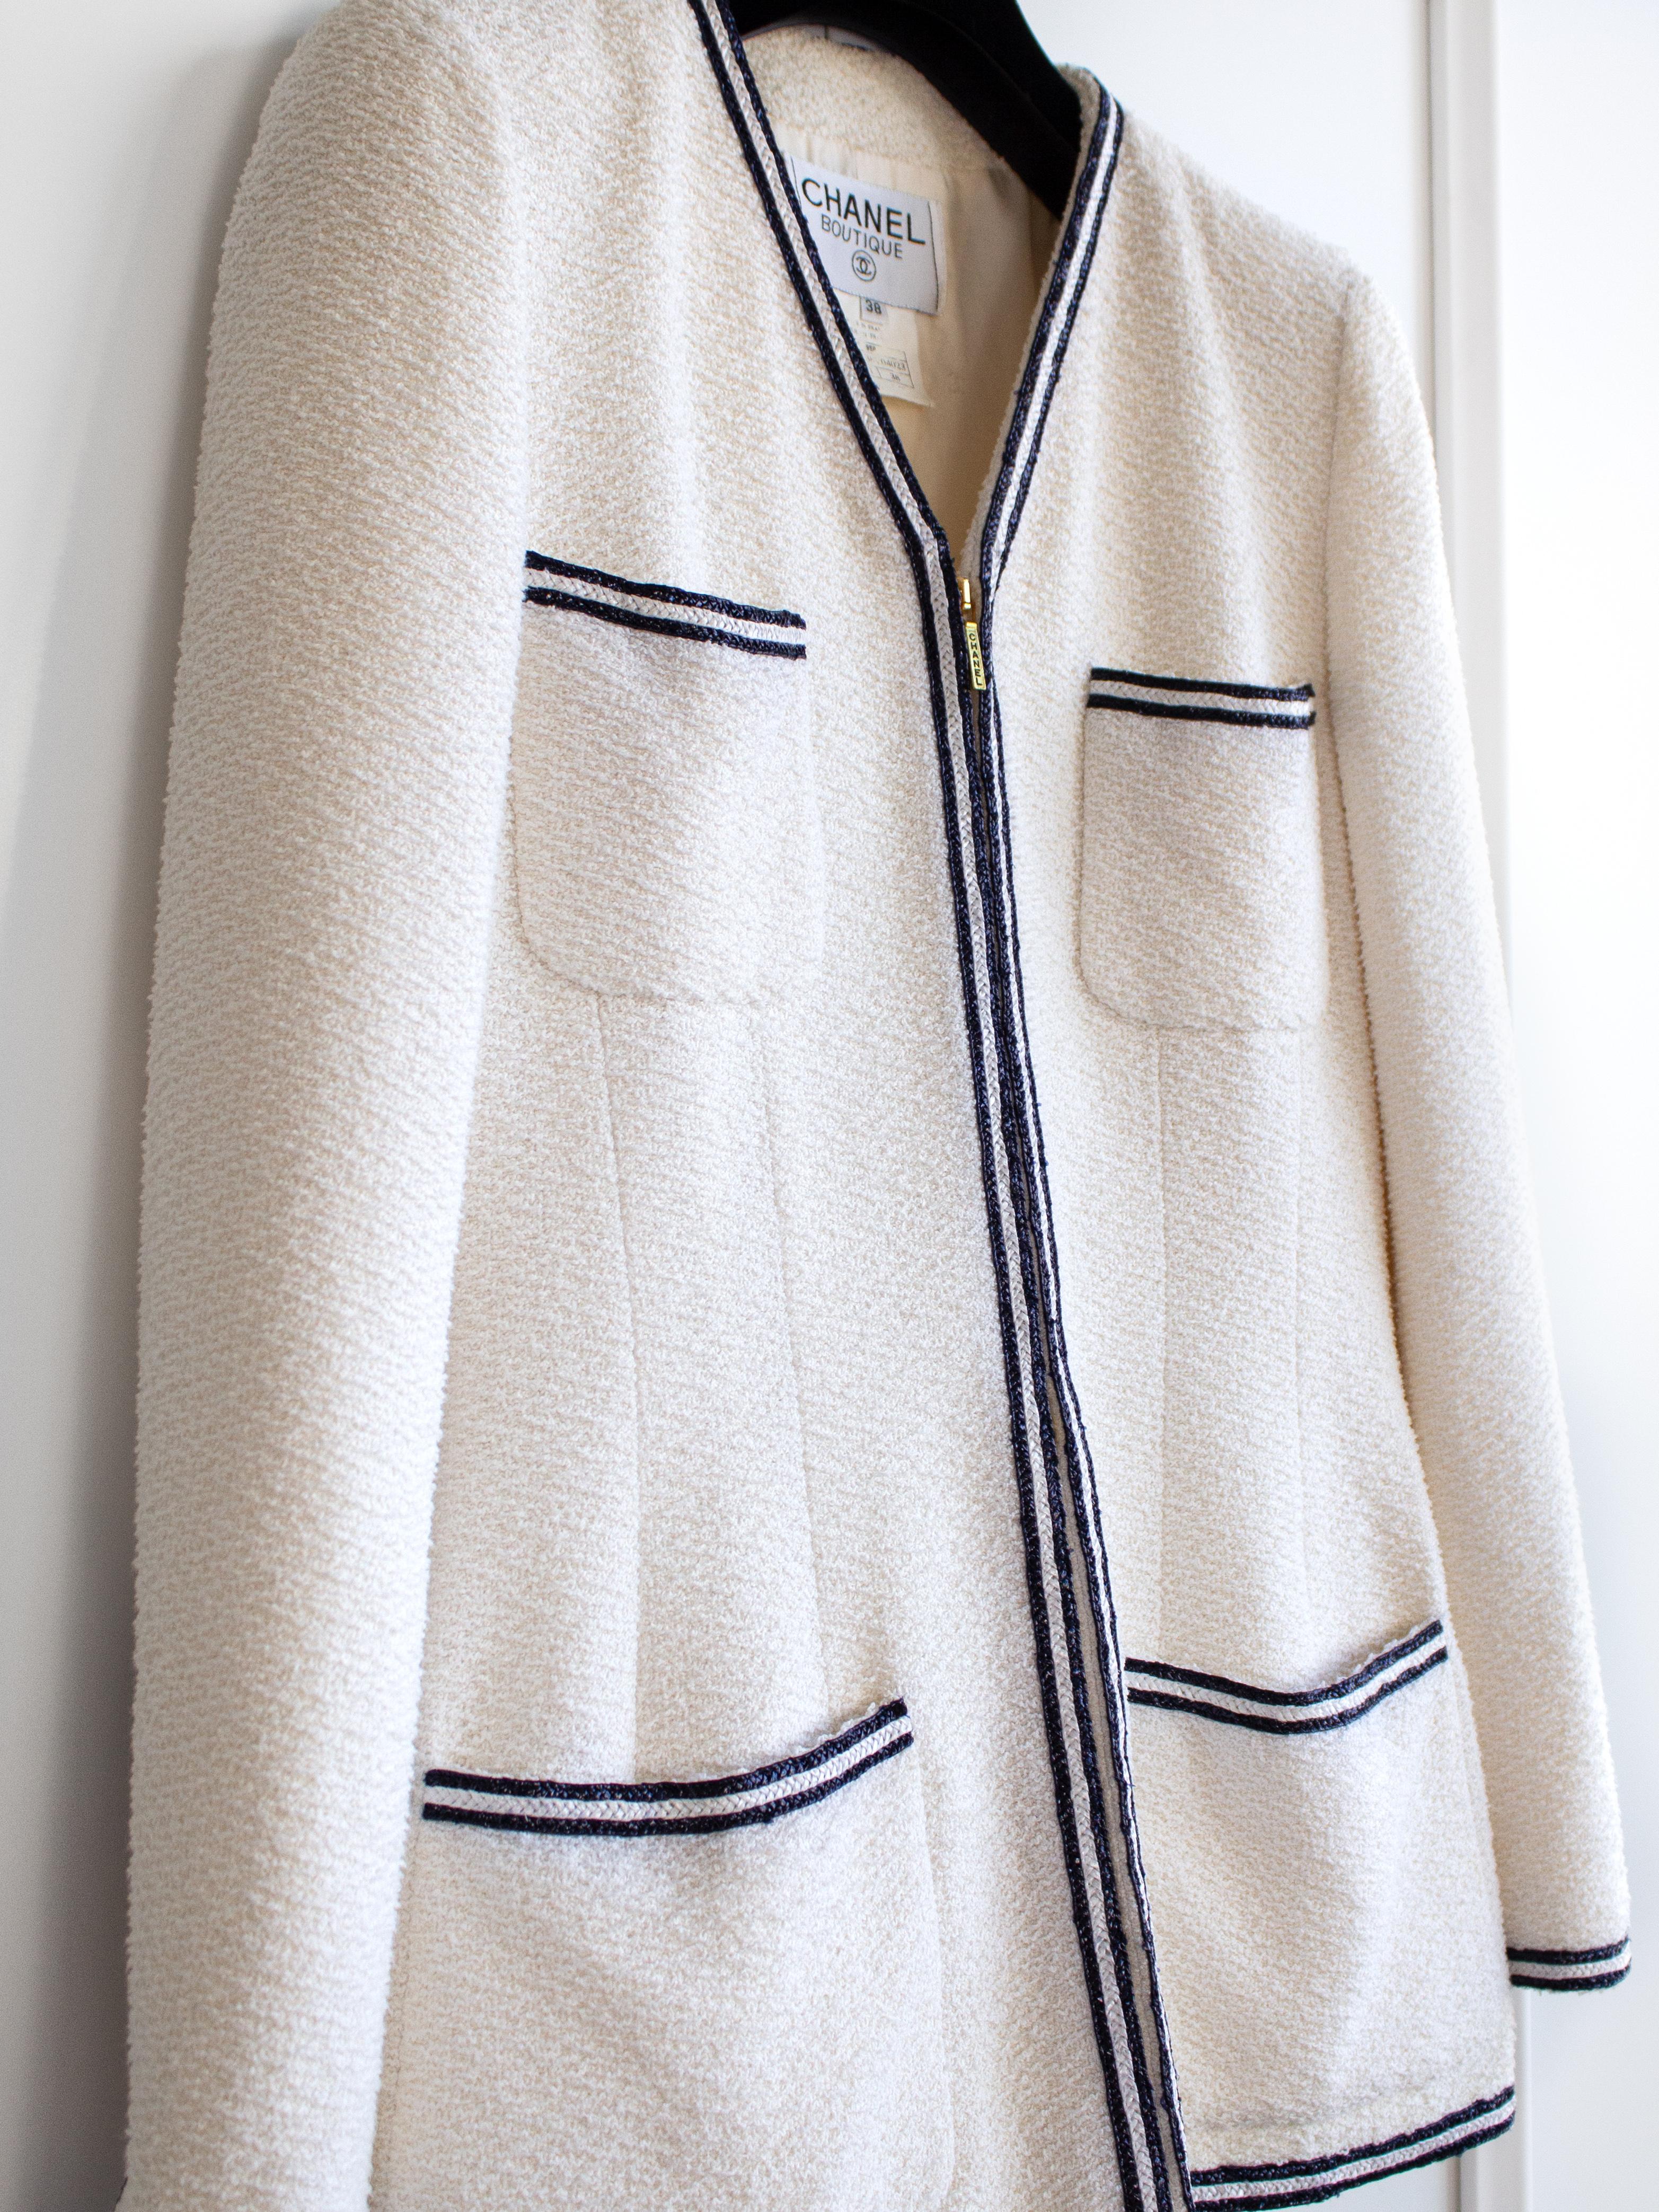 Chanel Vintage S/S 1995 White Ivory Black Tweed 95P Jacket Skirt Suit For Sale 4